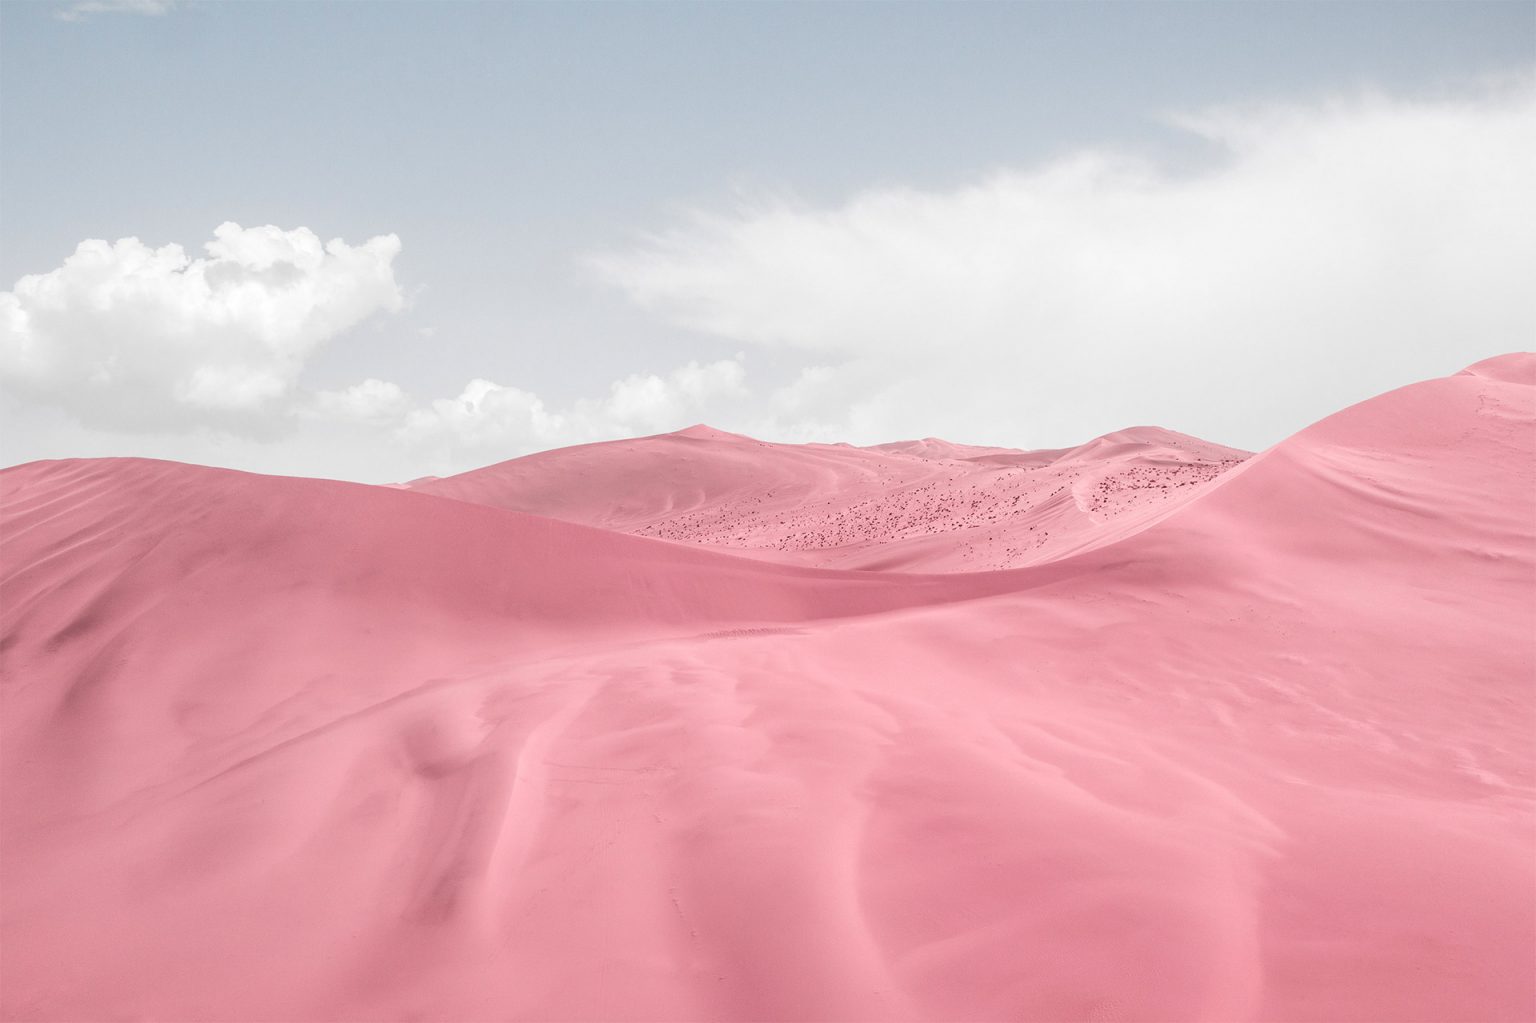 Sand Dune Photos by Jonas Daley | Daily design inspiration for ...